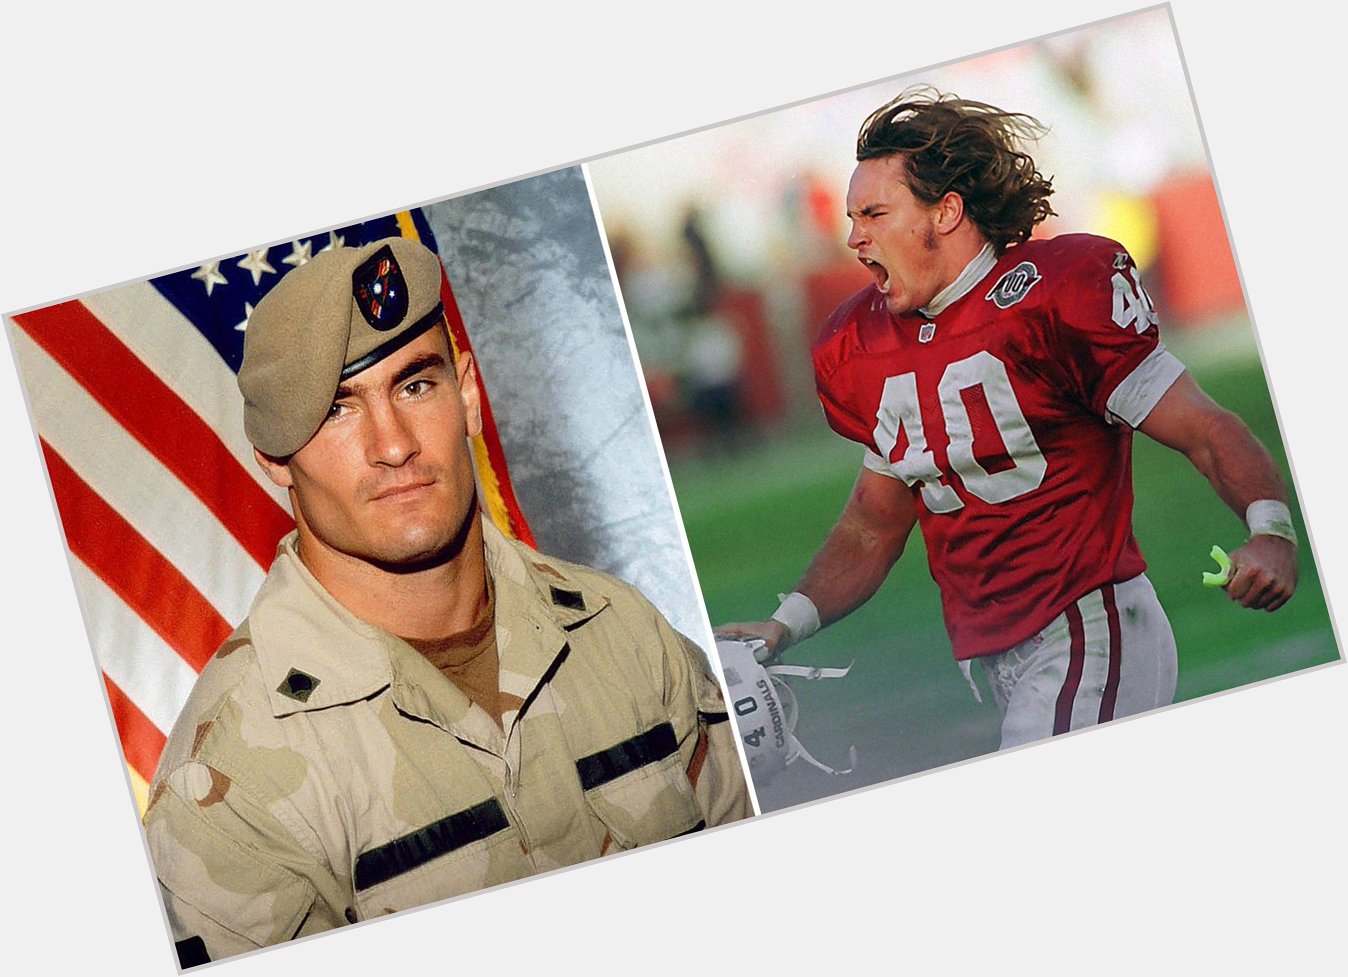 Happy Birthday to Pat Tillman, who would have turned 39 today! 